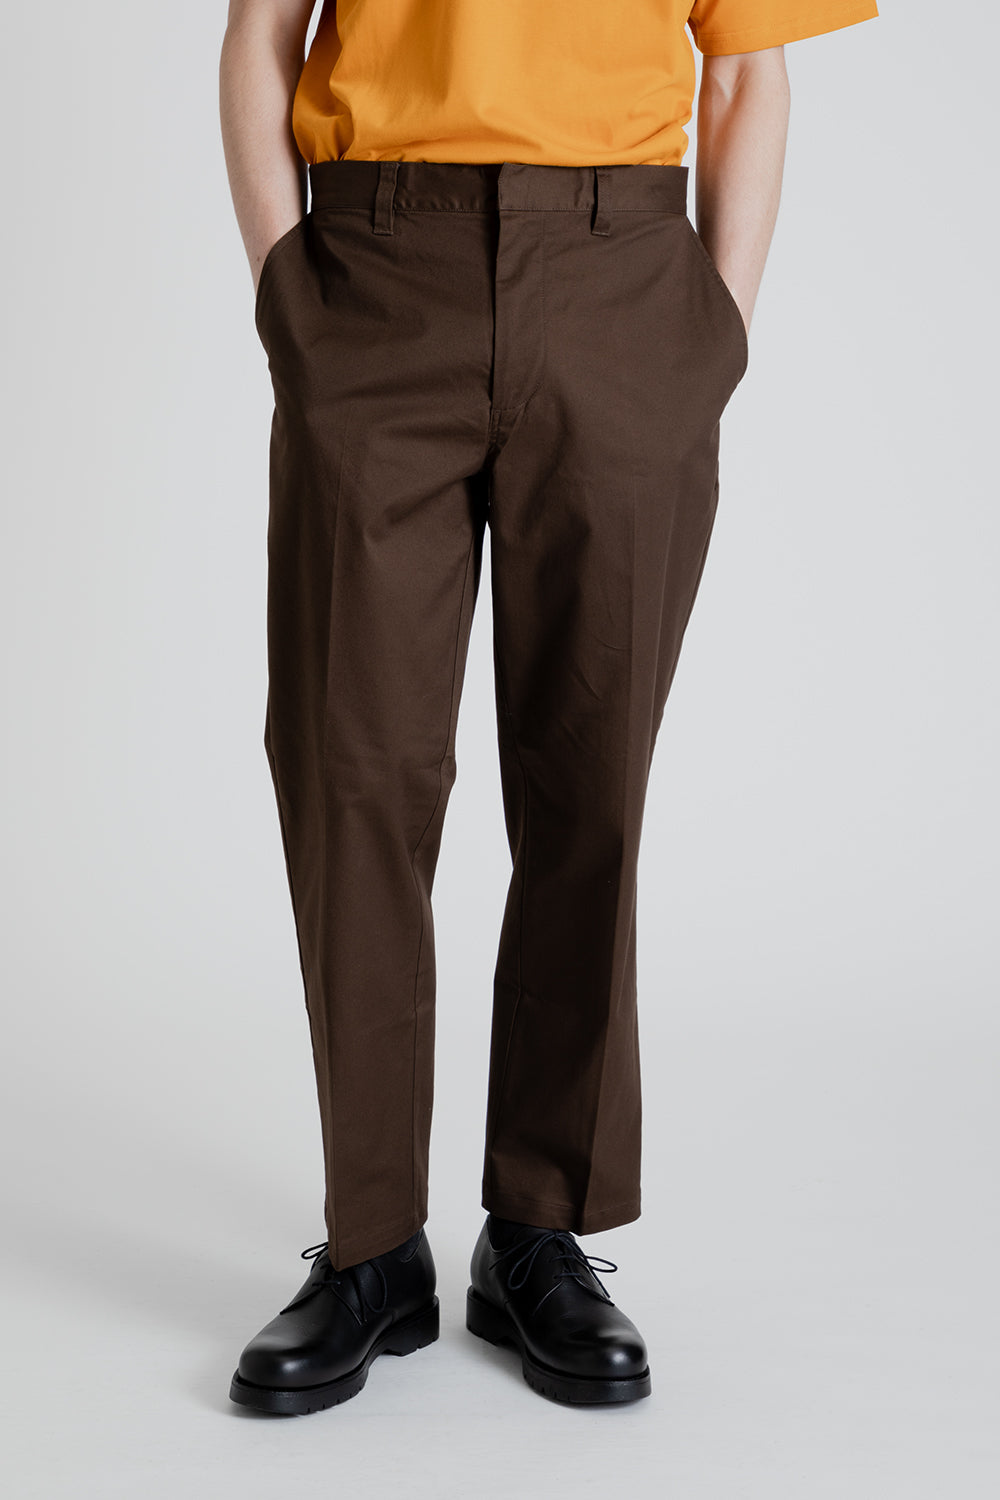 Relaxed Fit Chino Pants - Demitasse